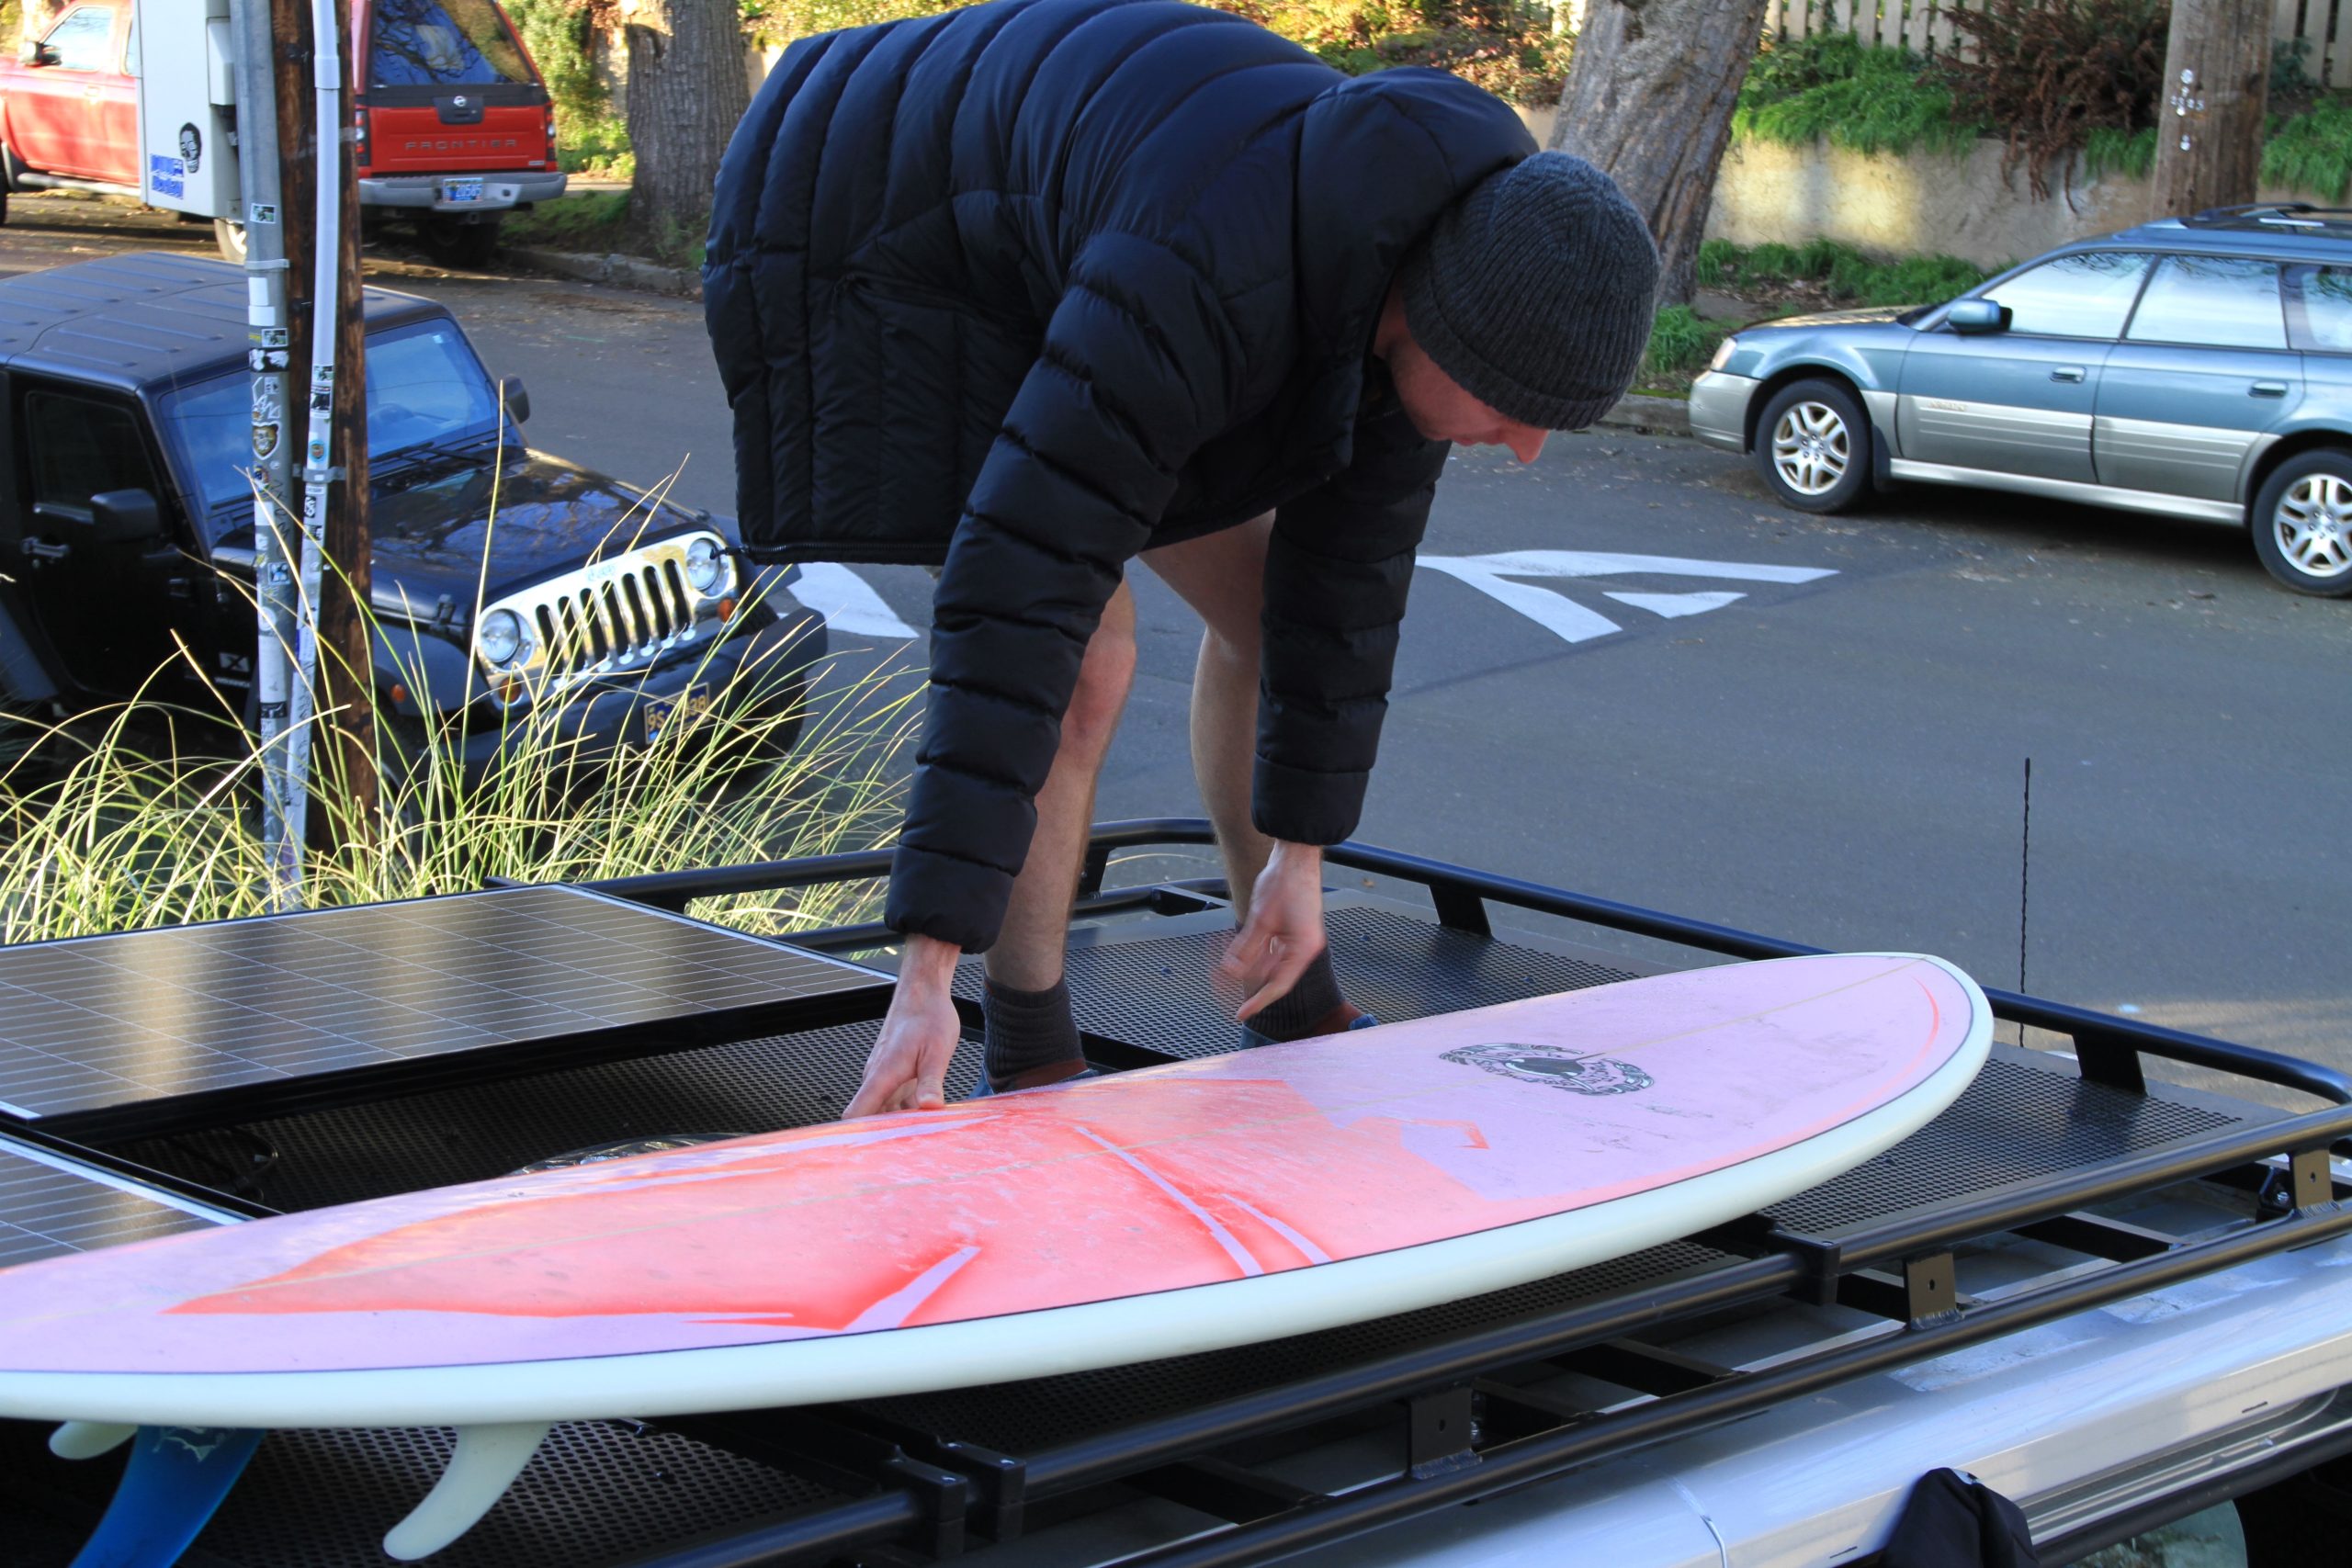 Look for an RV where you can mount your surfboard